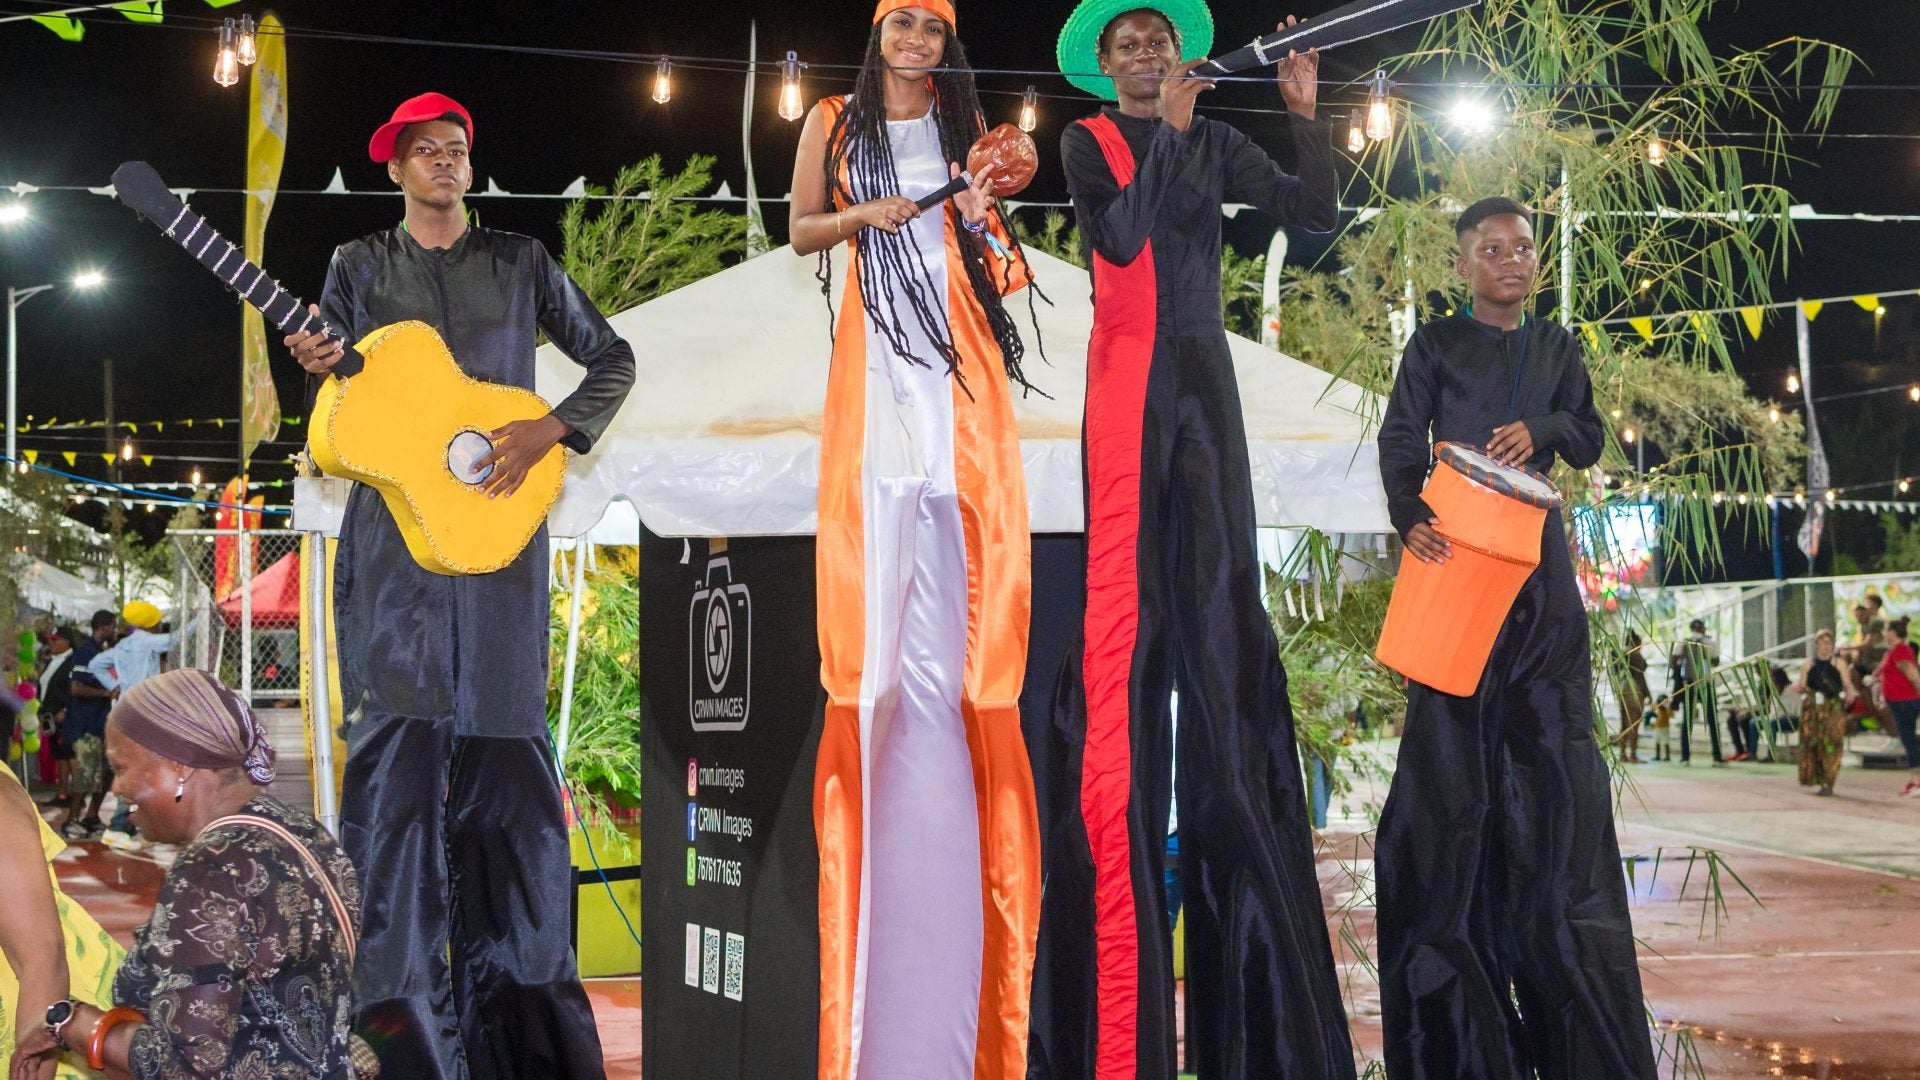 The World Creole Music Festival Is A Dynamic Cultural Journey Everyone Should Experience. Here's Why